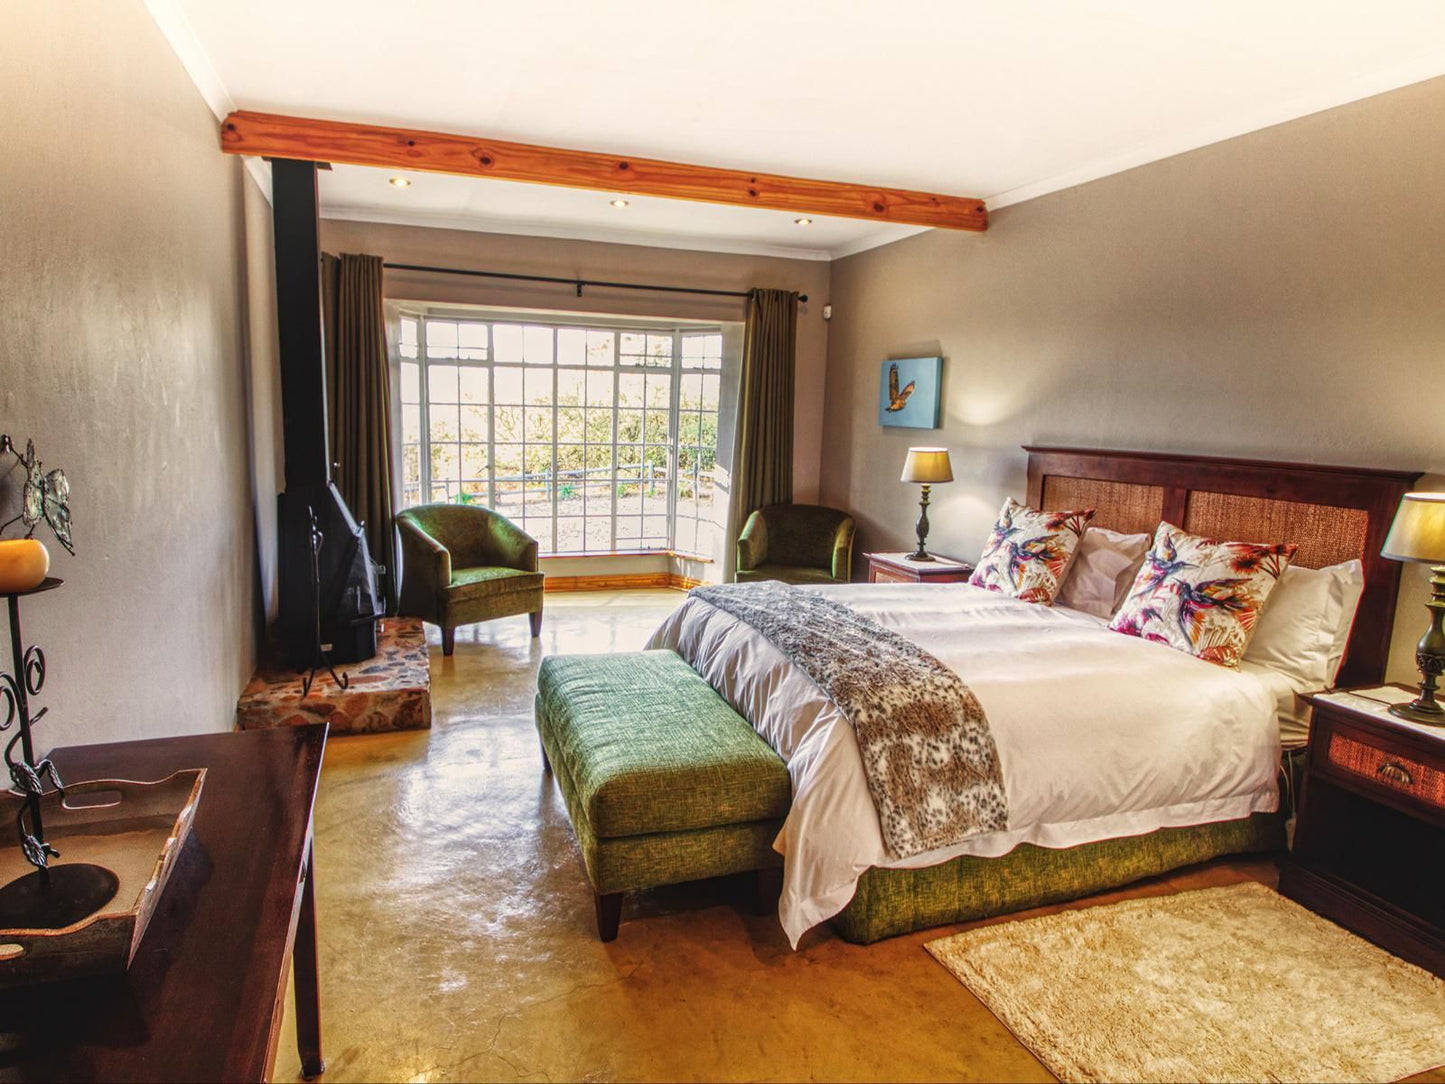 Wetlands Country House And Sheds Wakkerstroom Mpumalanga South Africa Bedroom